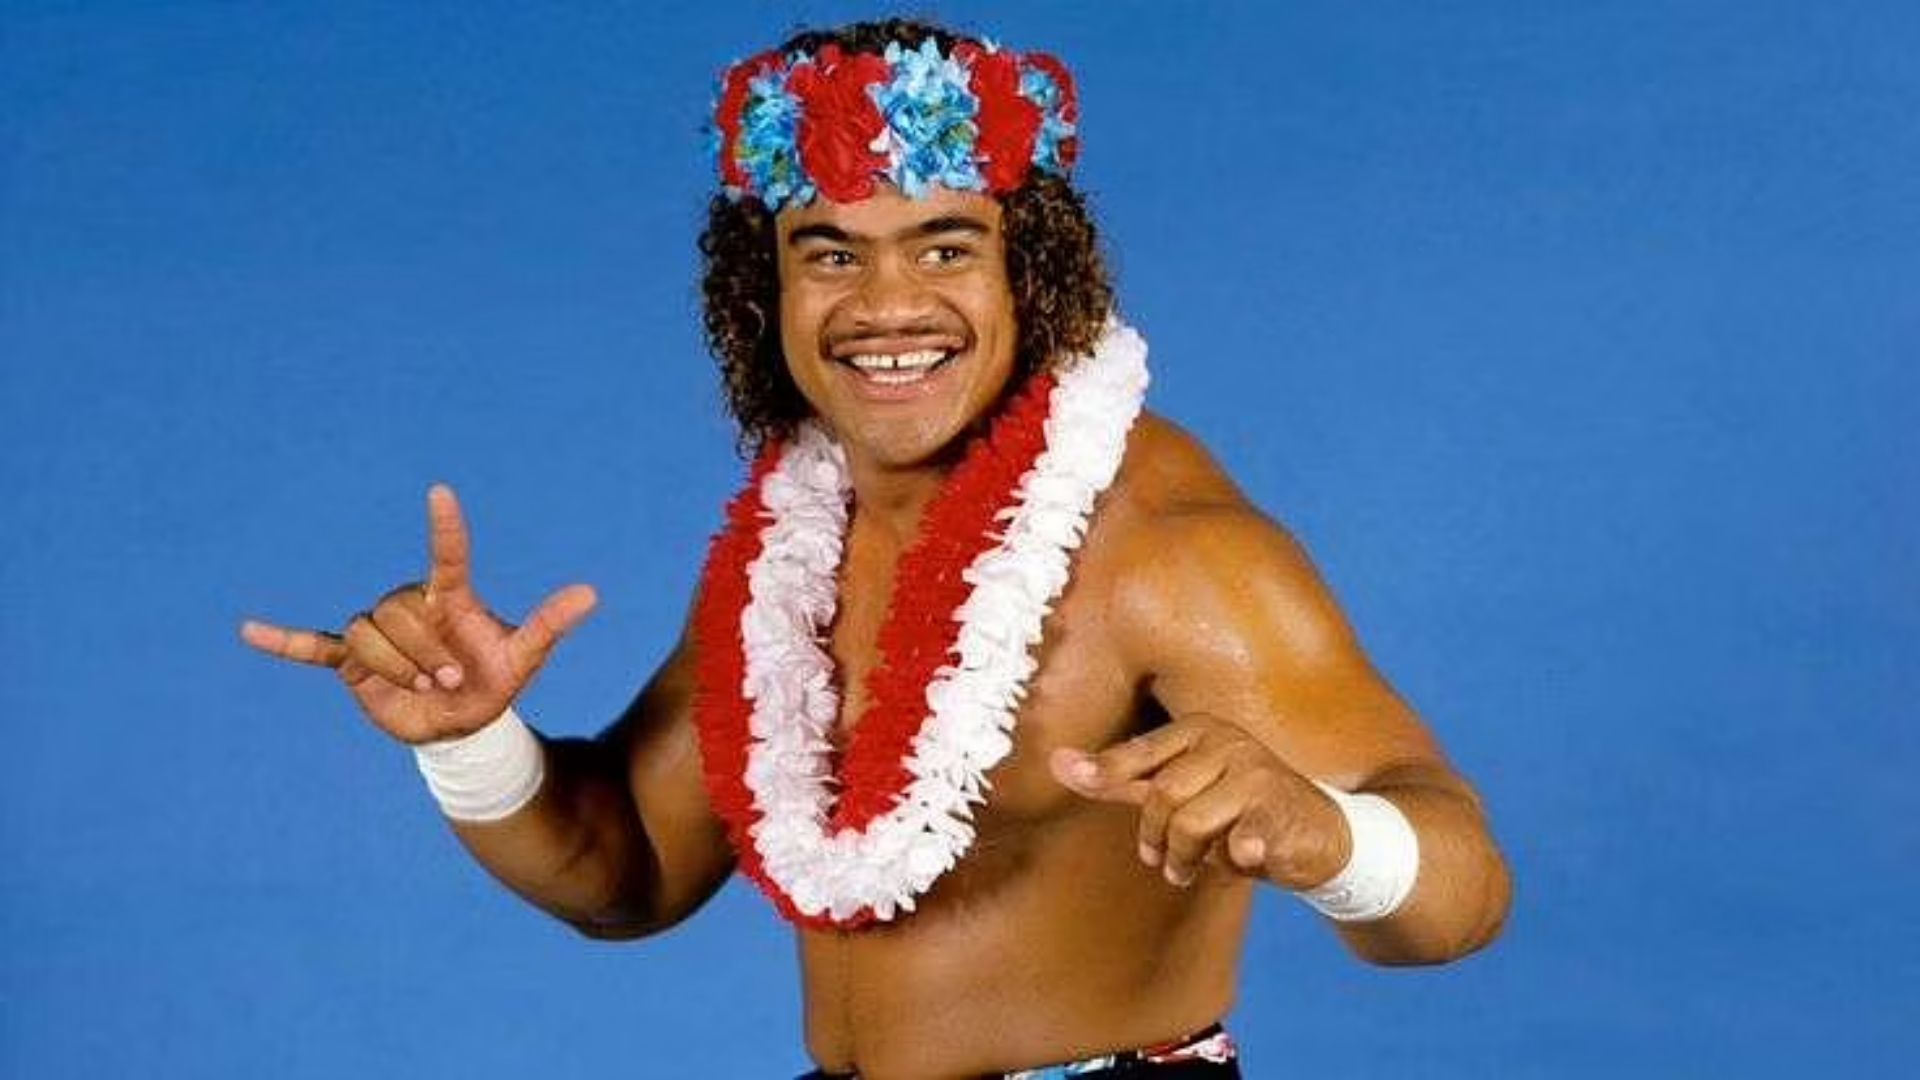 Tama had a 5-year long stint with the WWF